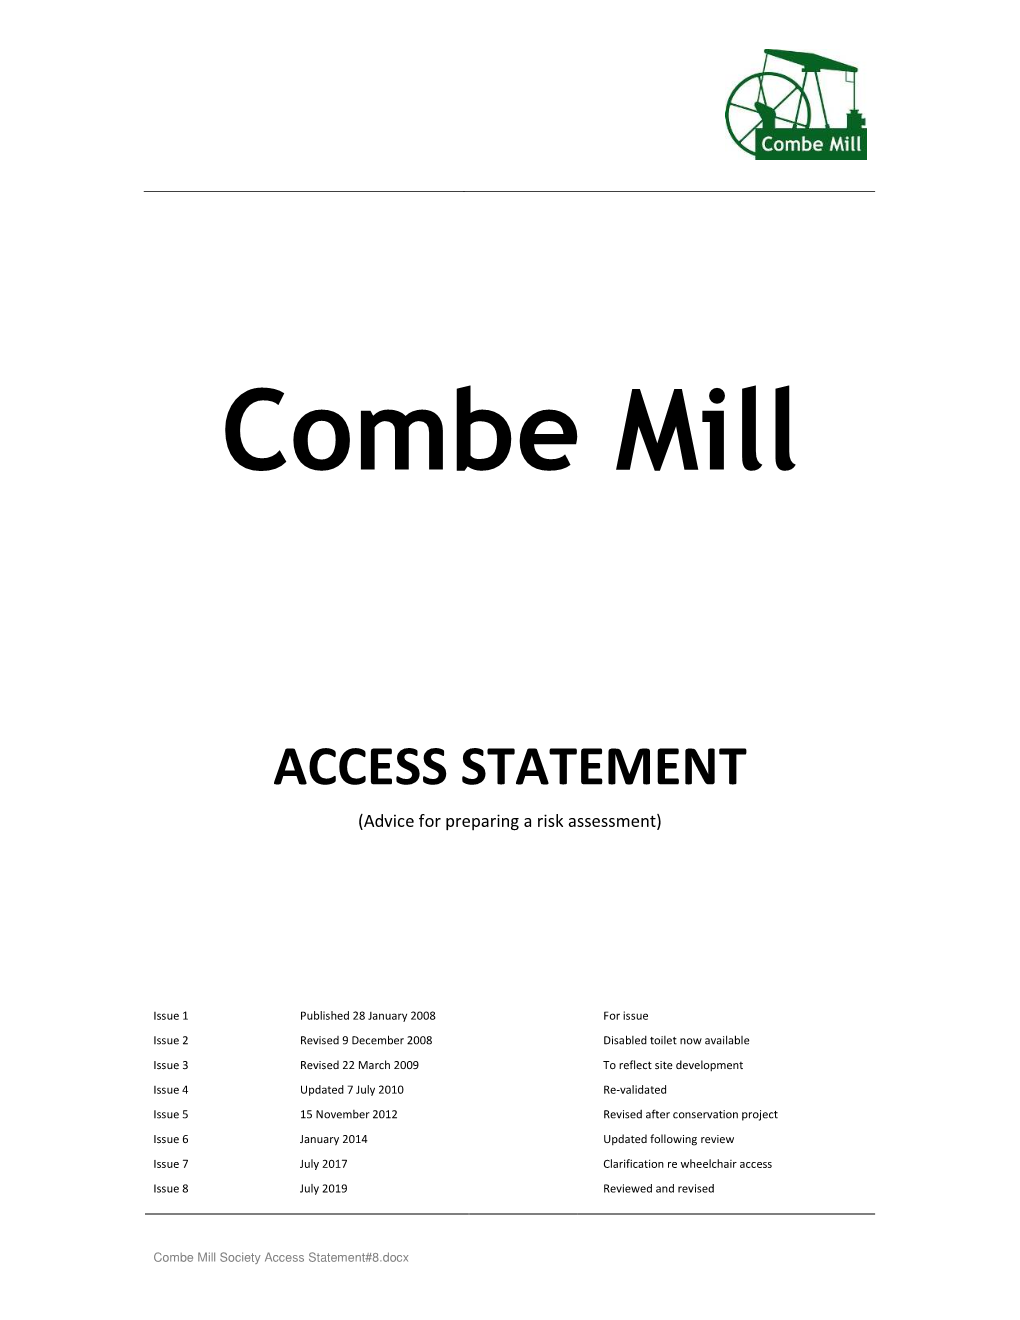 ACCESS STATEMENT (Advice for Preparing a Risk Assessment)